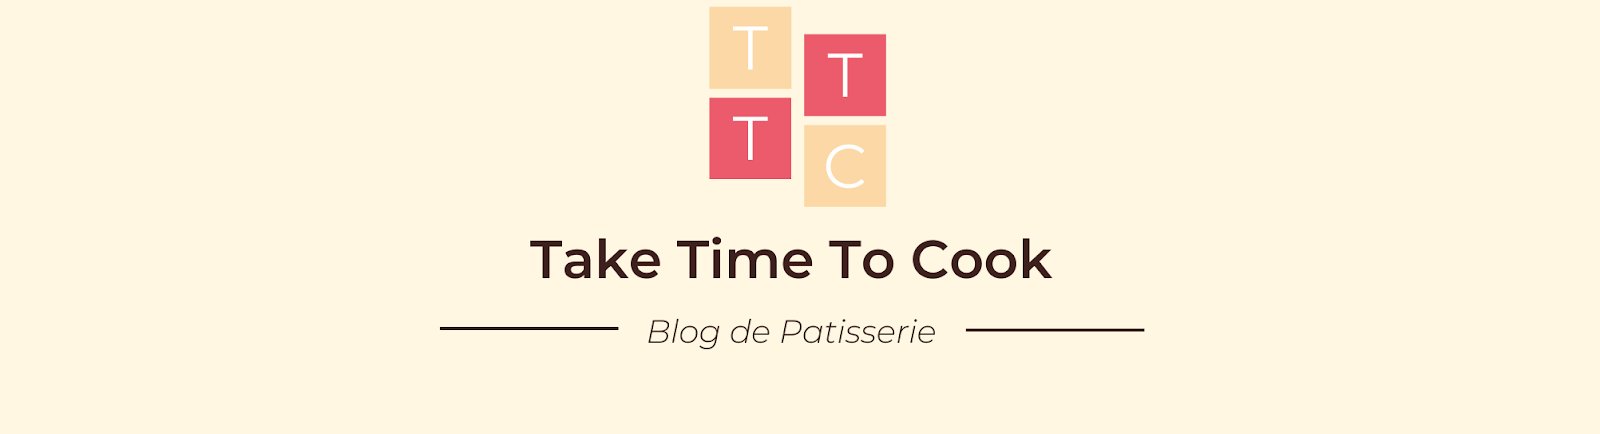 Take Time To Cook